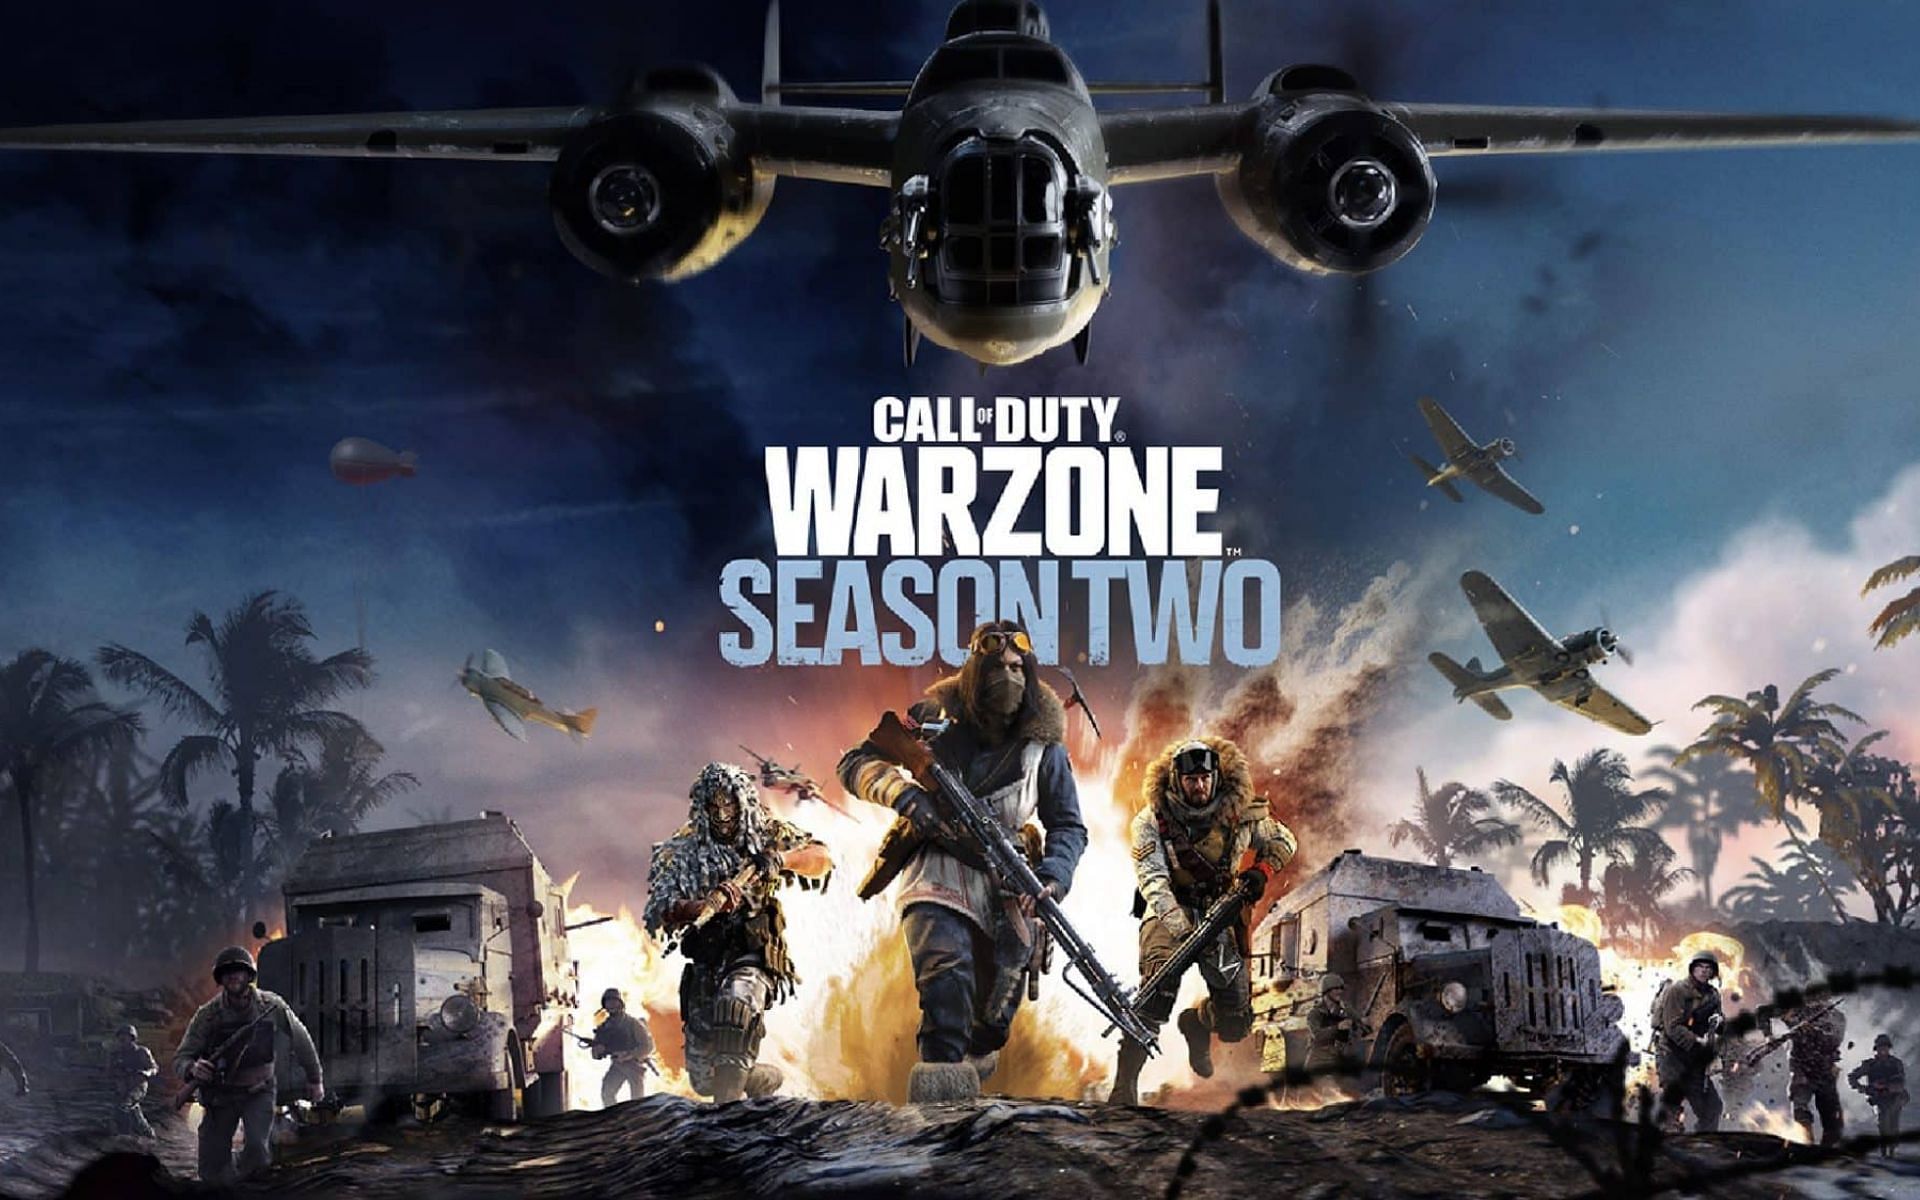 Season Two of Call of Duty: Warzone has seen an increased number of cheaters (Image via Activision)